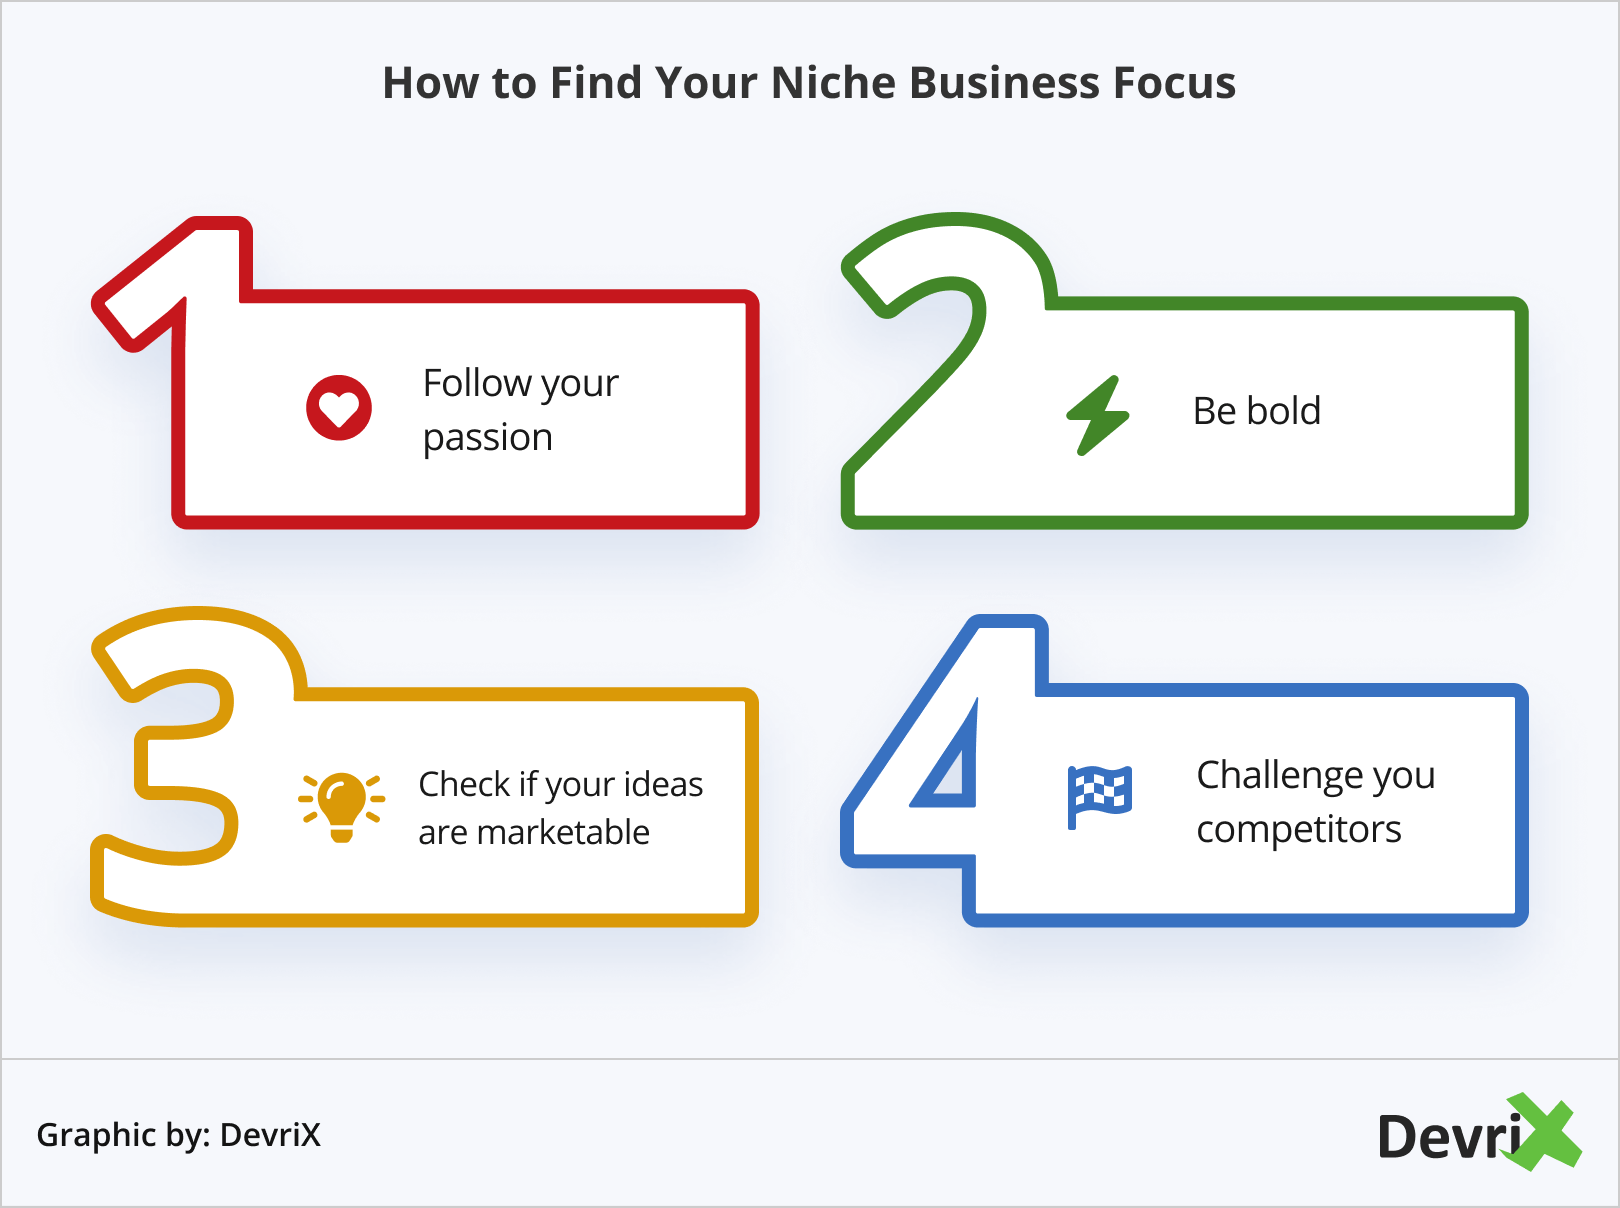 How to Find Your Niche Business Focus